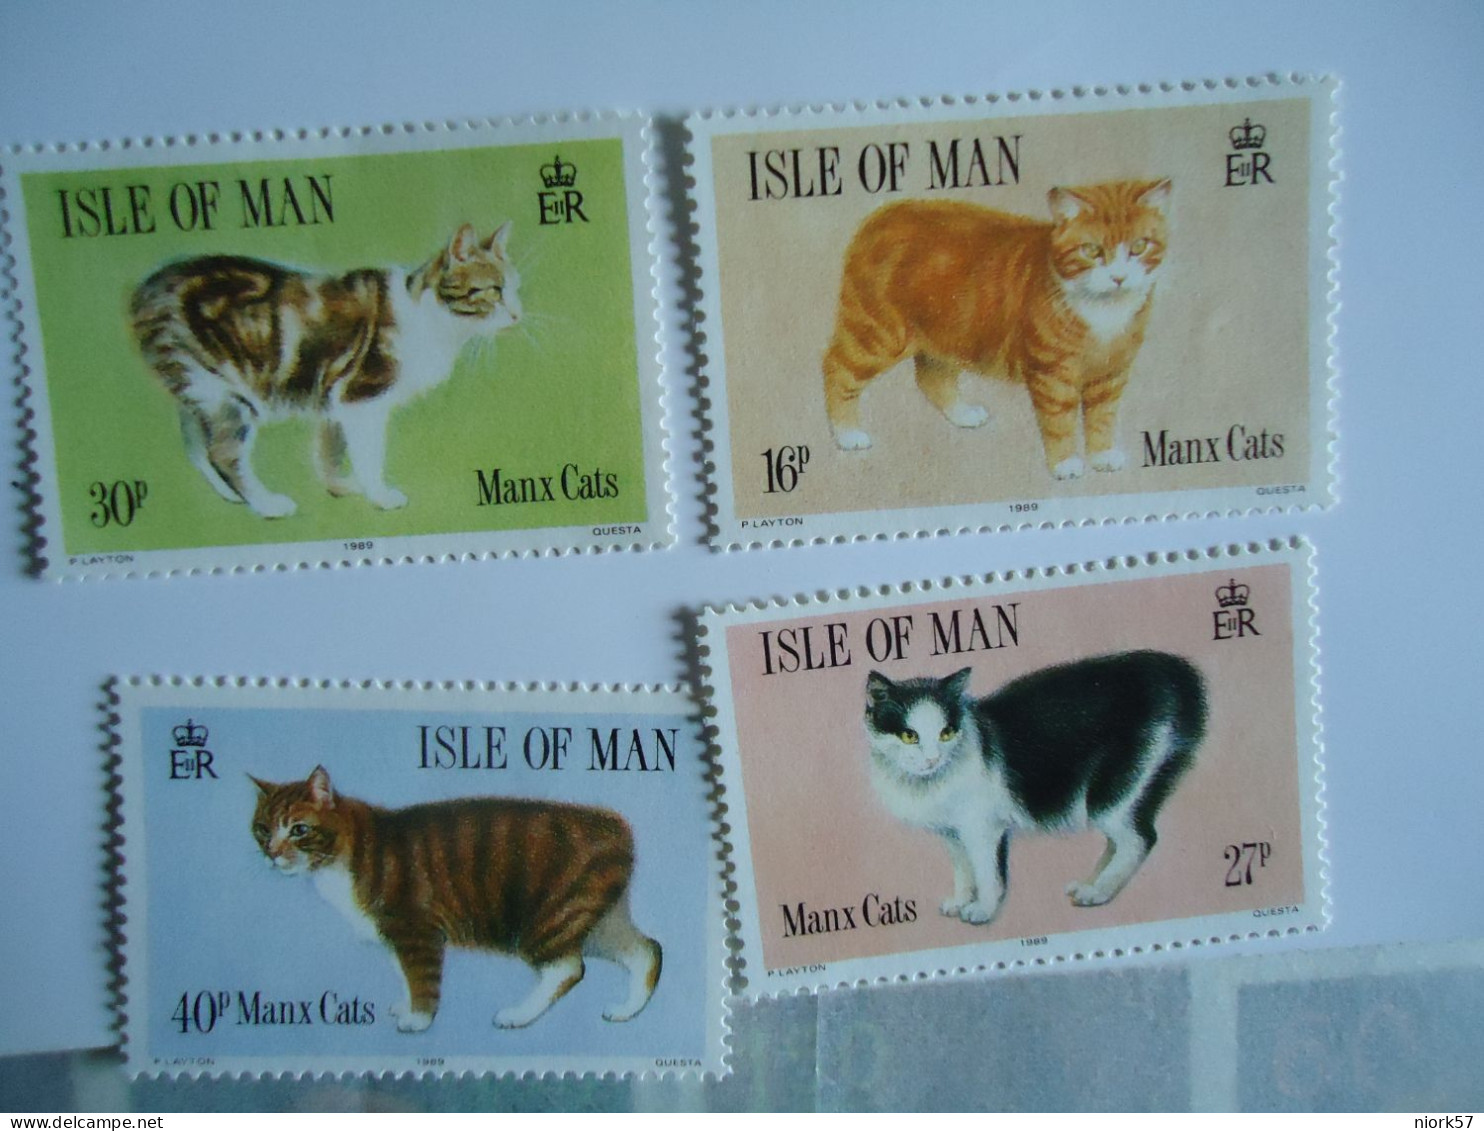 ISLE OF MAN   MNH   4  STAMPS    ANIMALS  CAT  CATS - Chats Domestiques